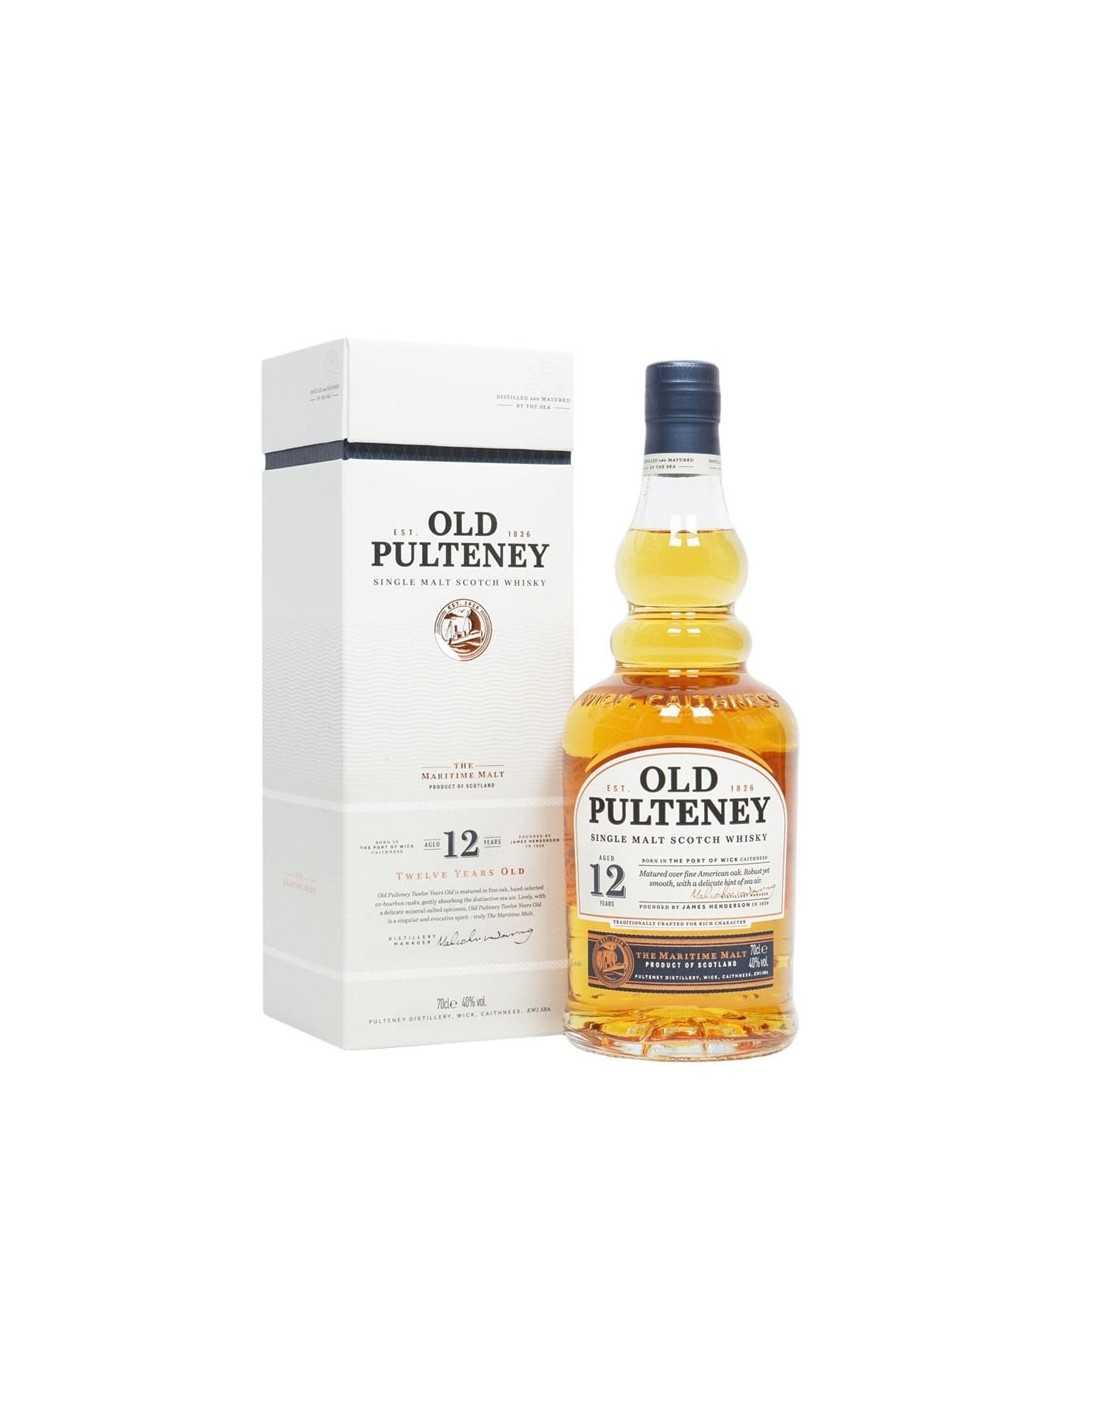 Whisky Old Pulteney, 0.7L, 12 ani, 40% alc., Scotia alcooldiscount.ro